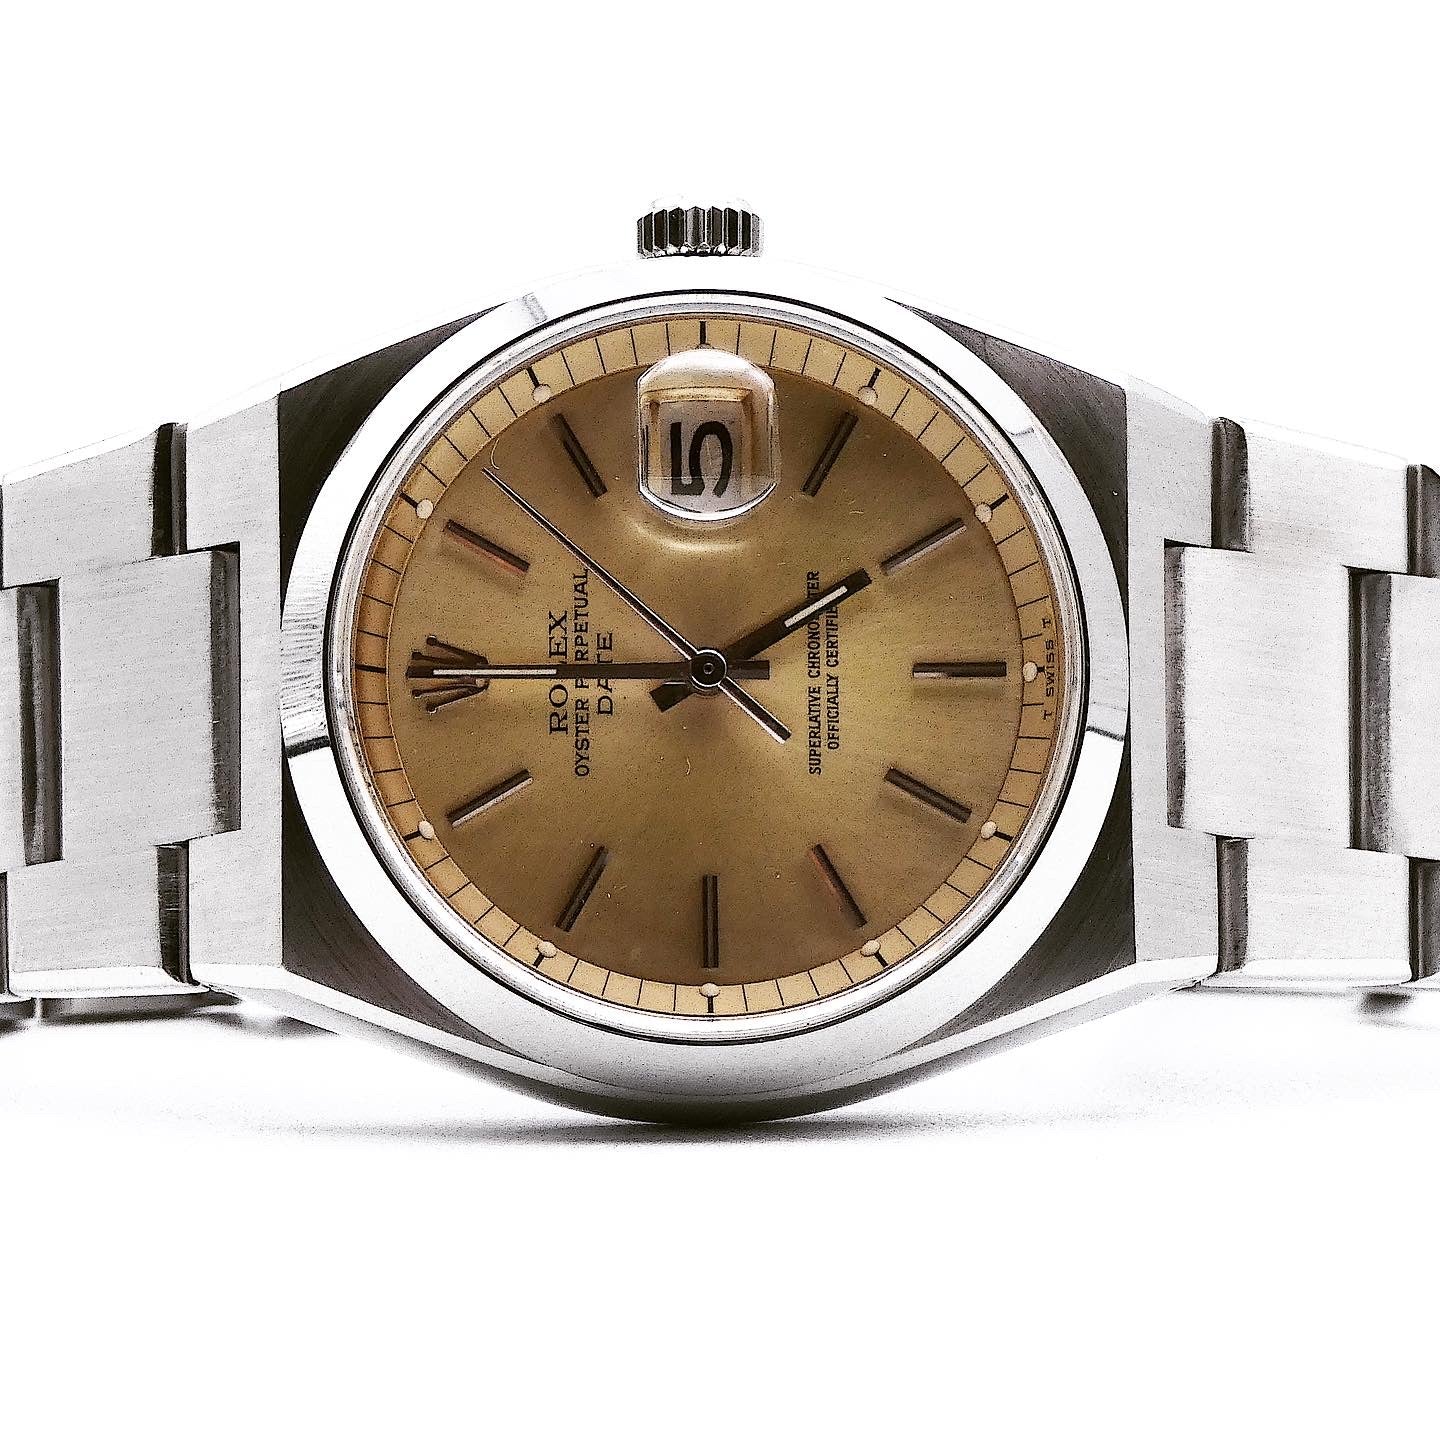 SOLD RARE Oyster Perpetual Date Automatic / only aprox 1500 made